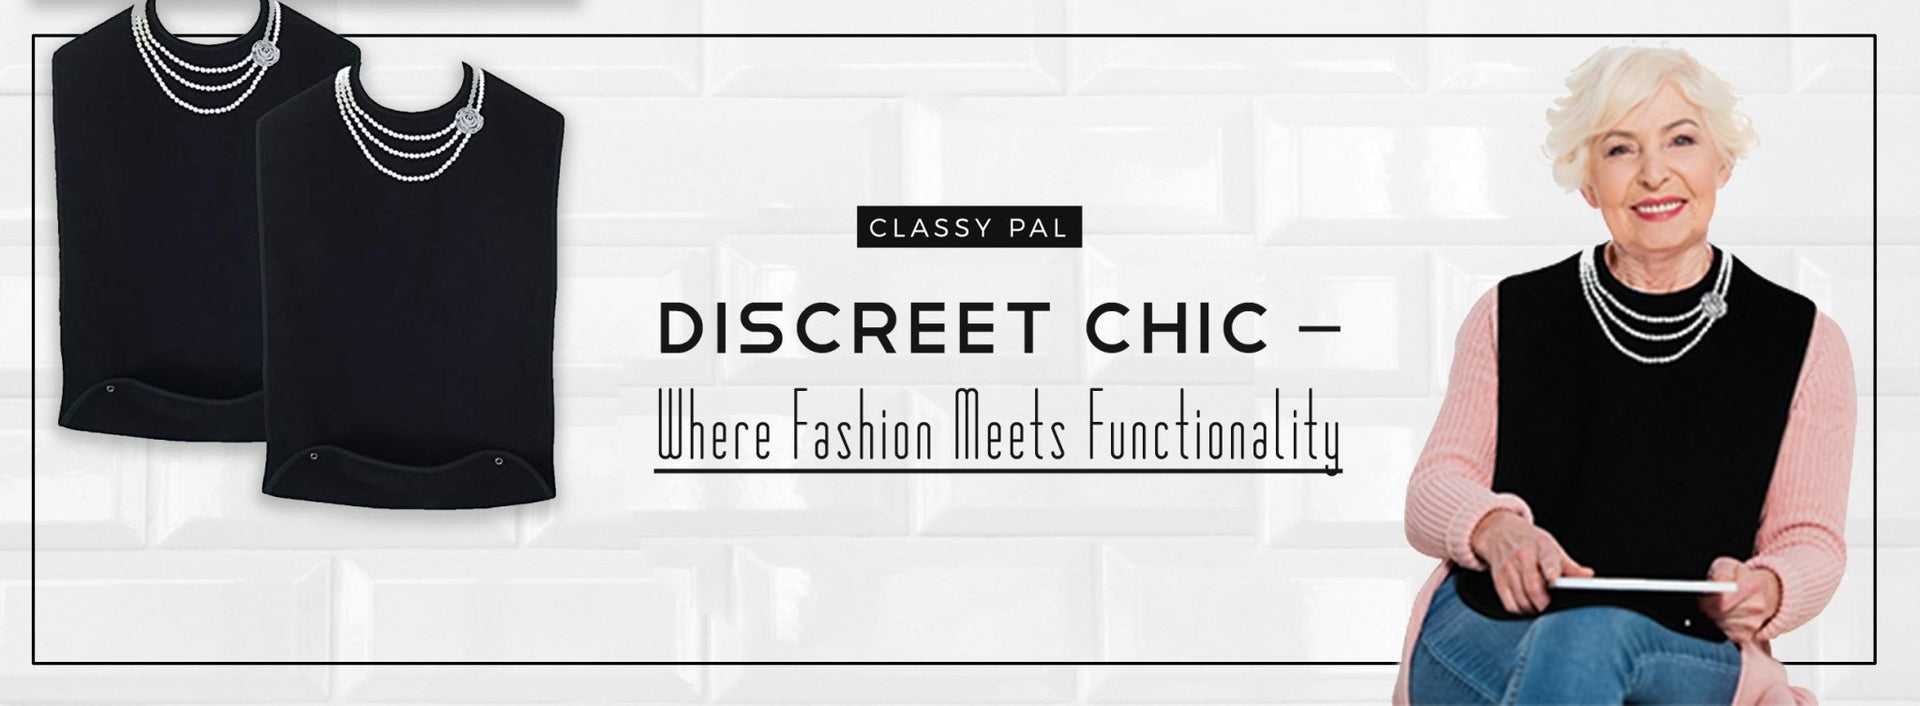 Discreet Chic – Where Fashion Meets Functionality | Classy Pal